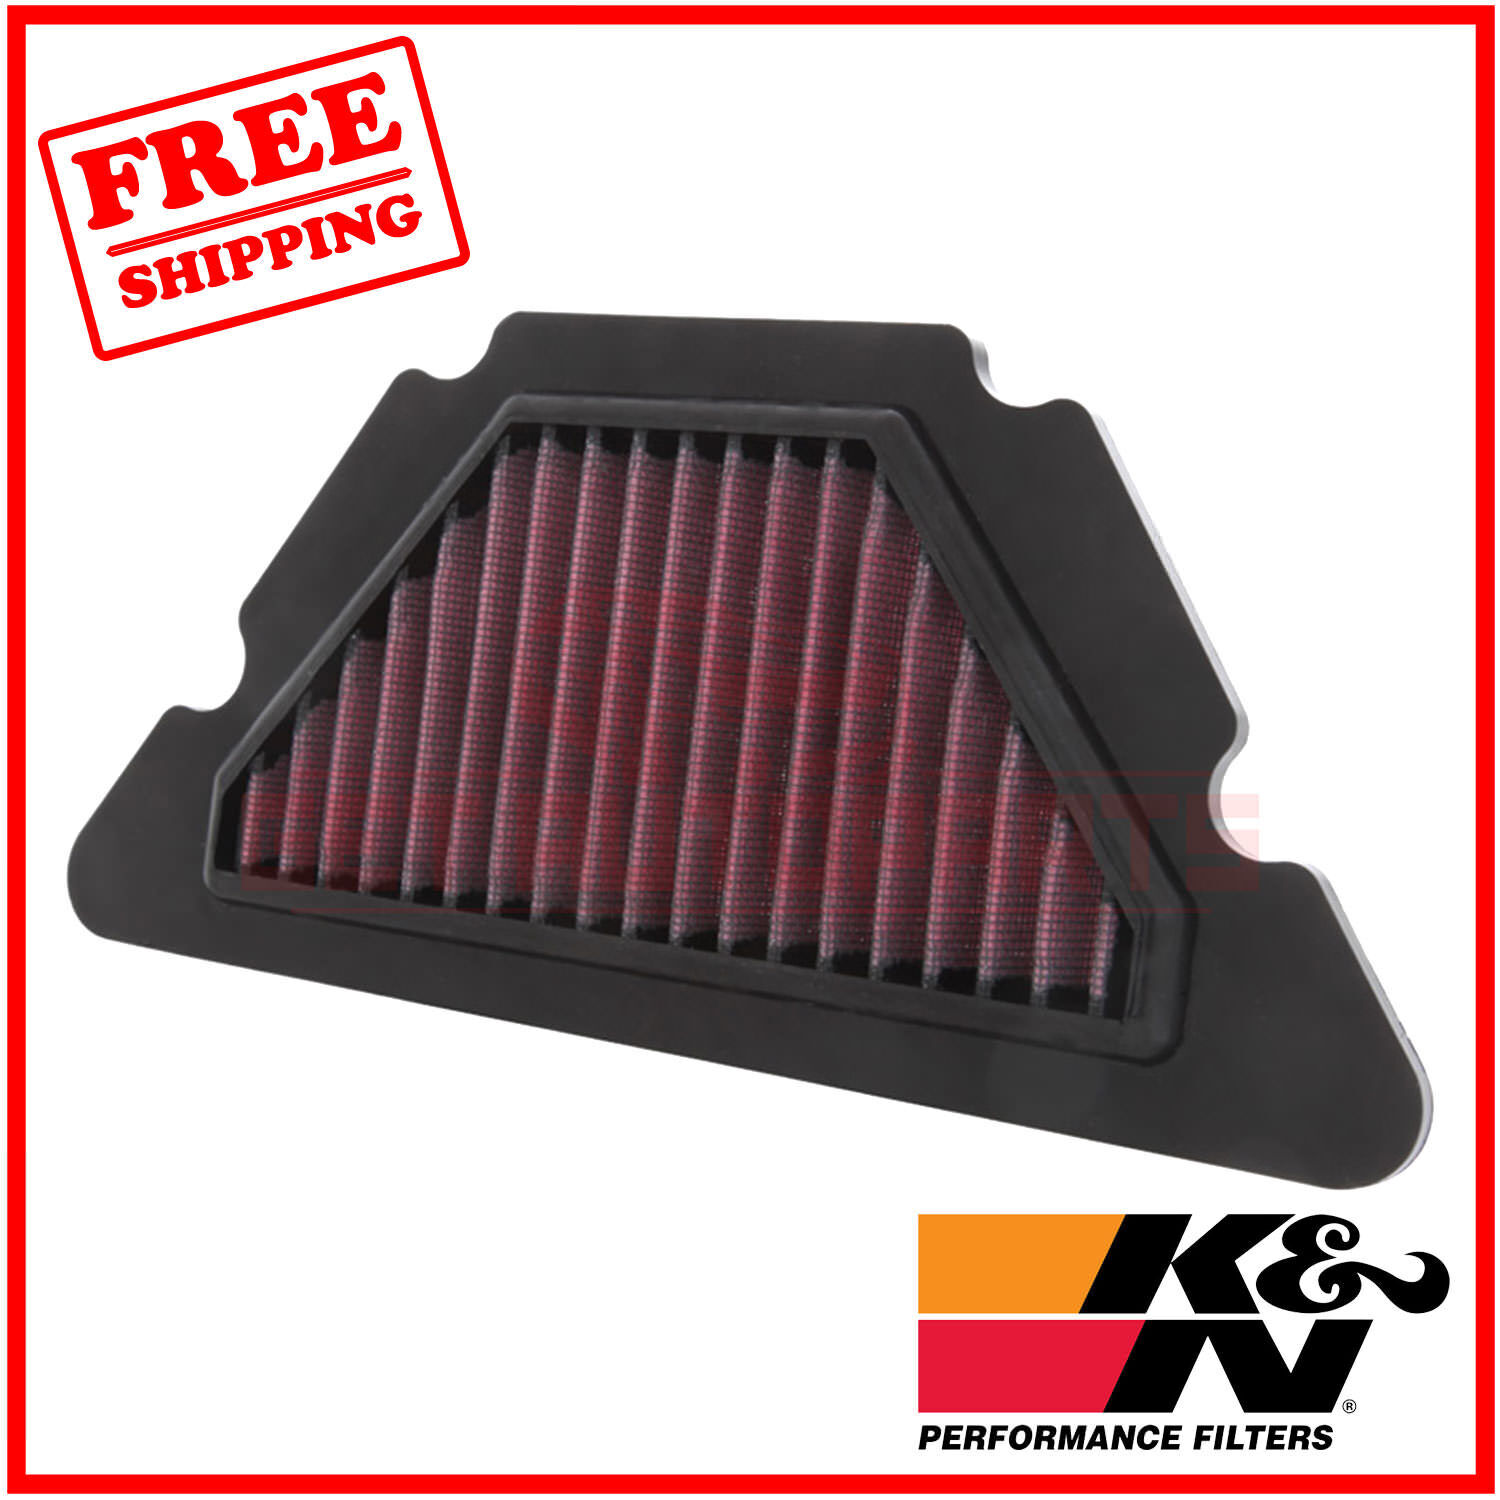 K&N Replacement Air Filter for Yamaha FZ6R 2009-2017